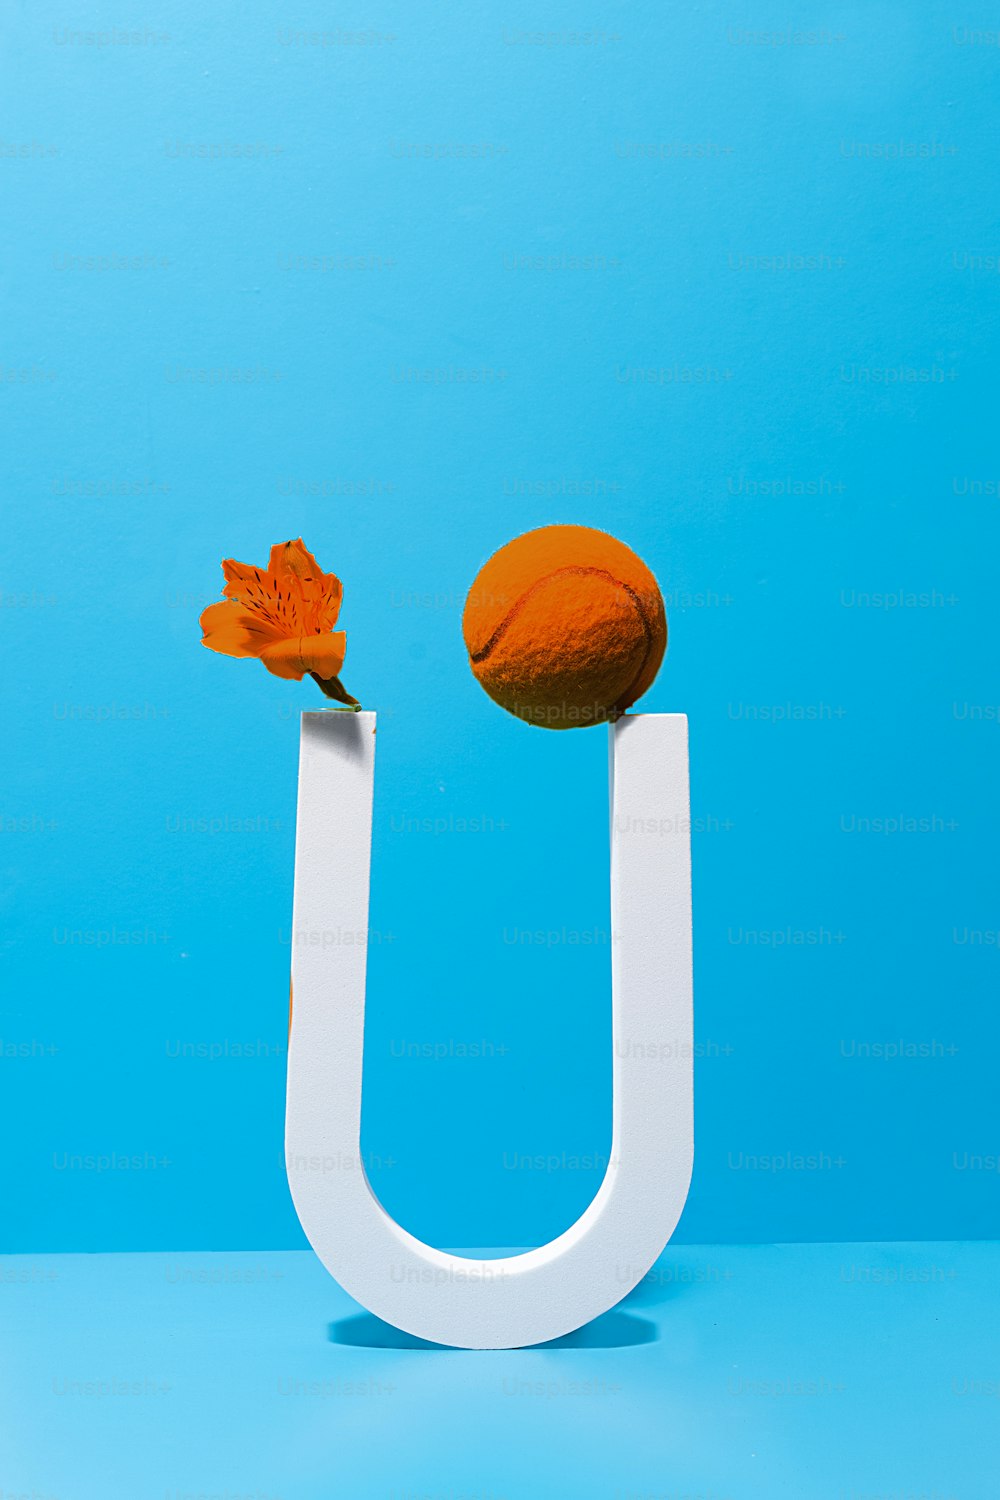 an orange object sitting on top of a white object